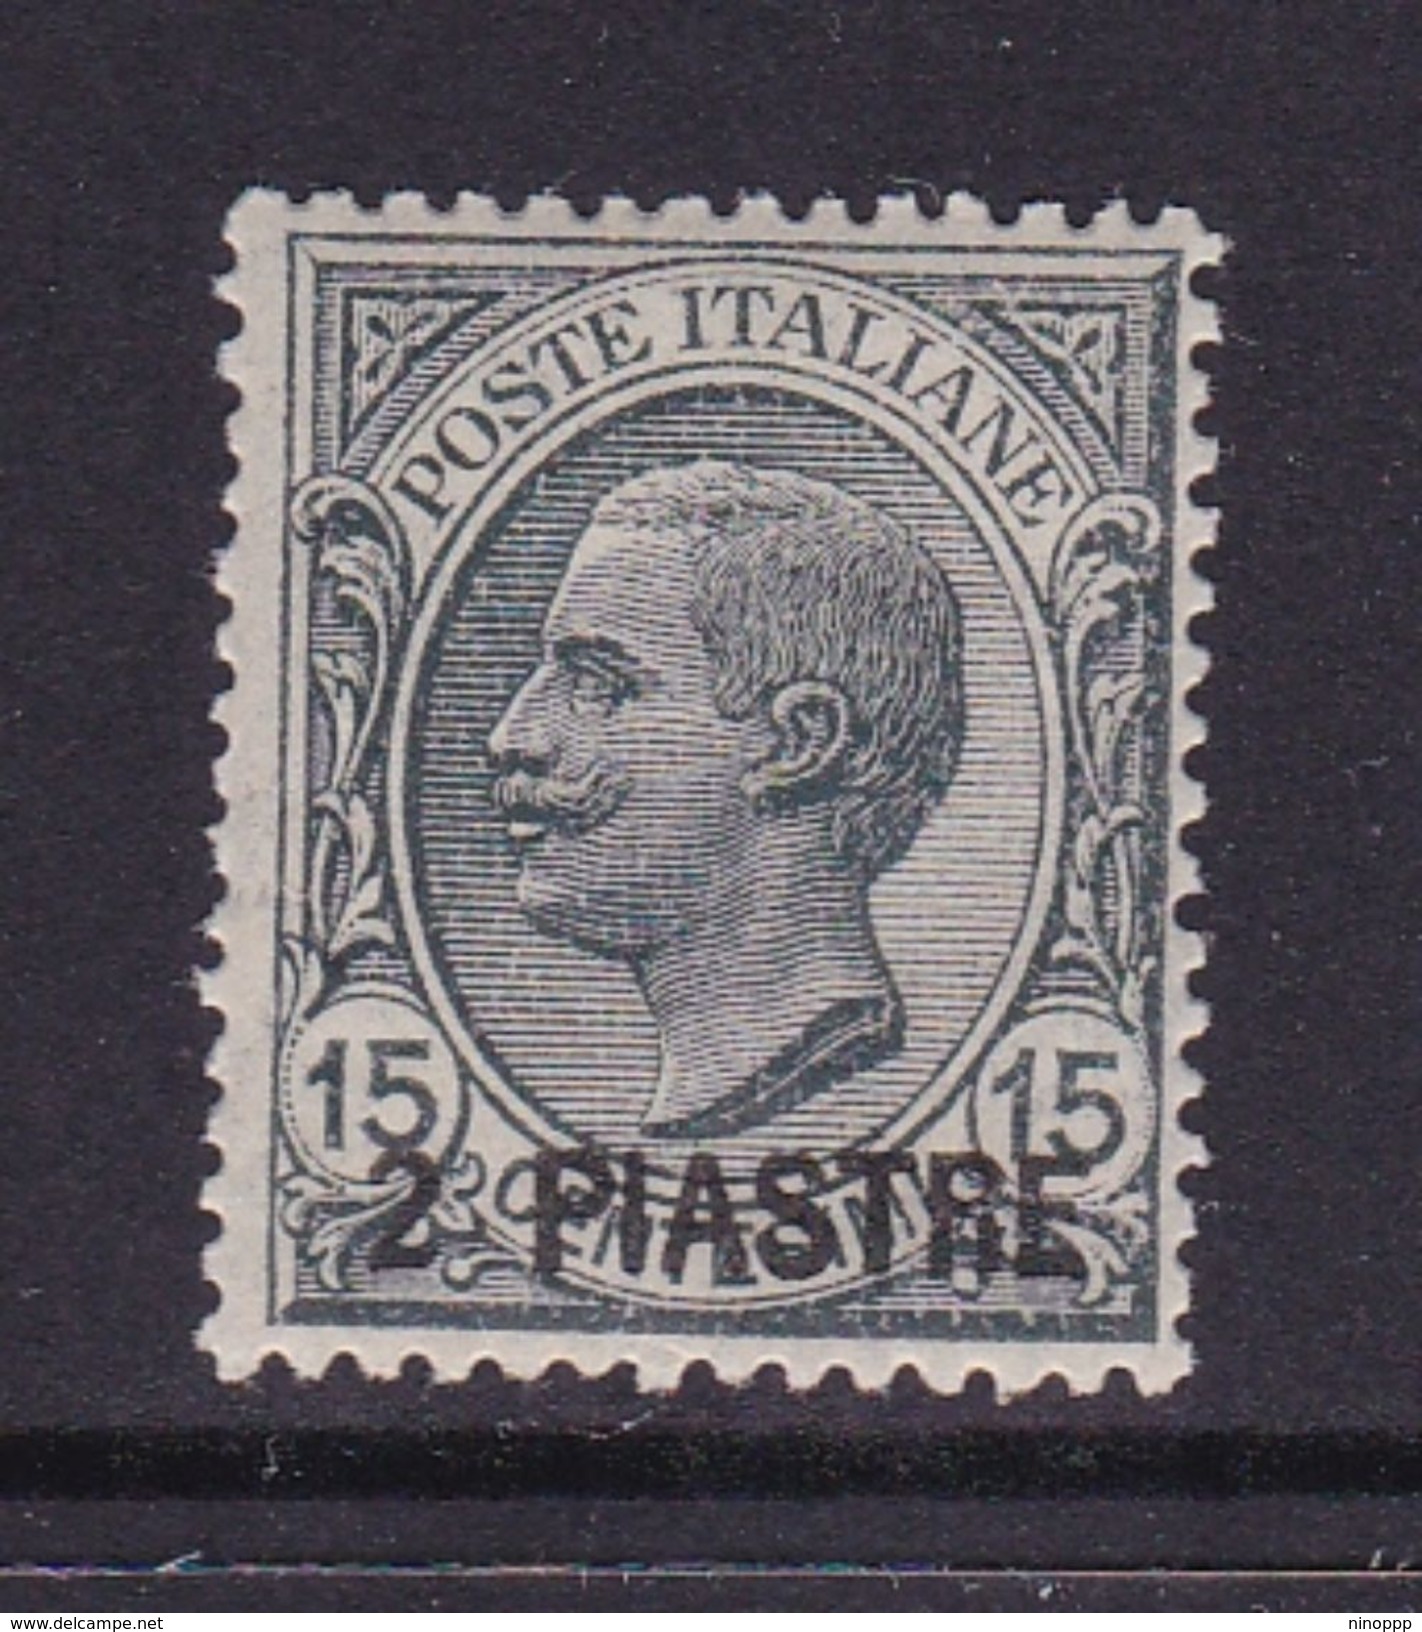 Italy-Italian Offices Abroad-European And Asia Offices-Constantinople S29 1921  2 Piastre On 15c Grey MNH - European And Asian Offices